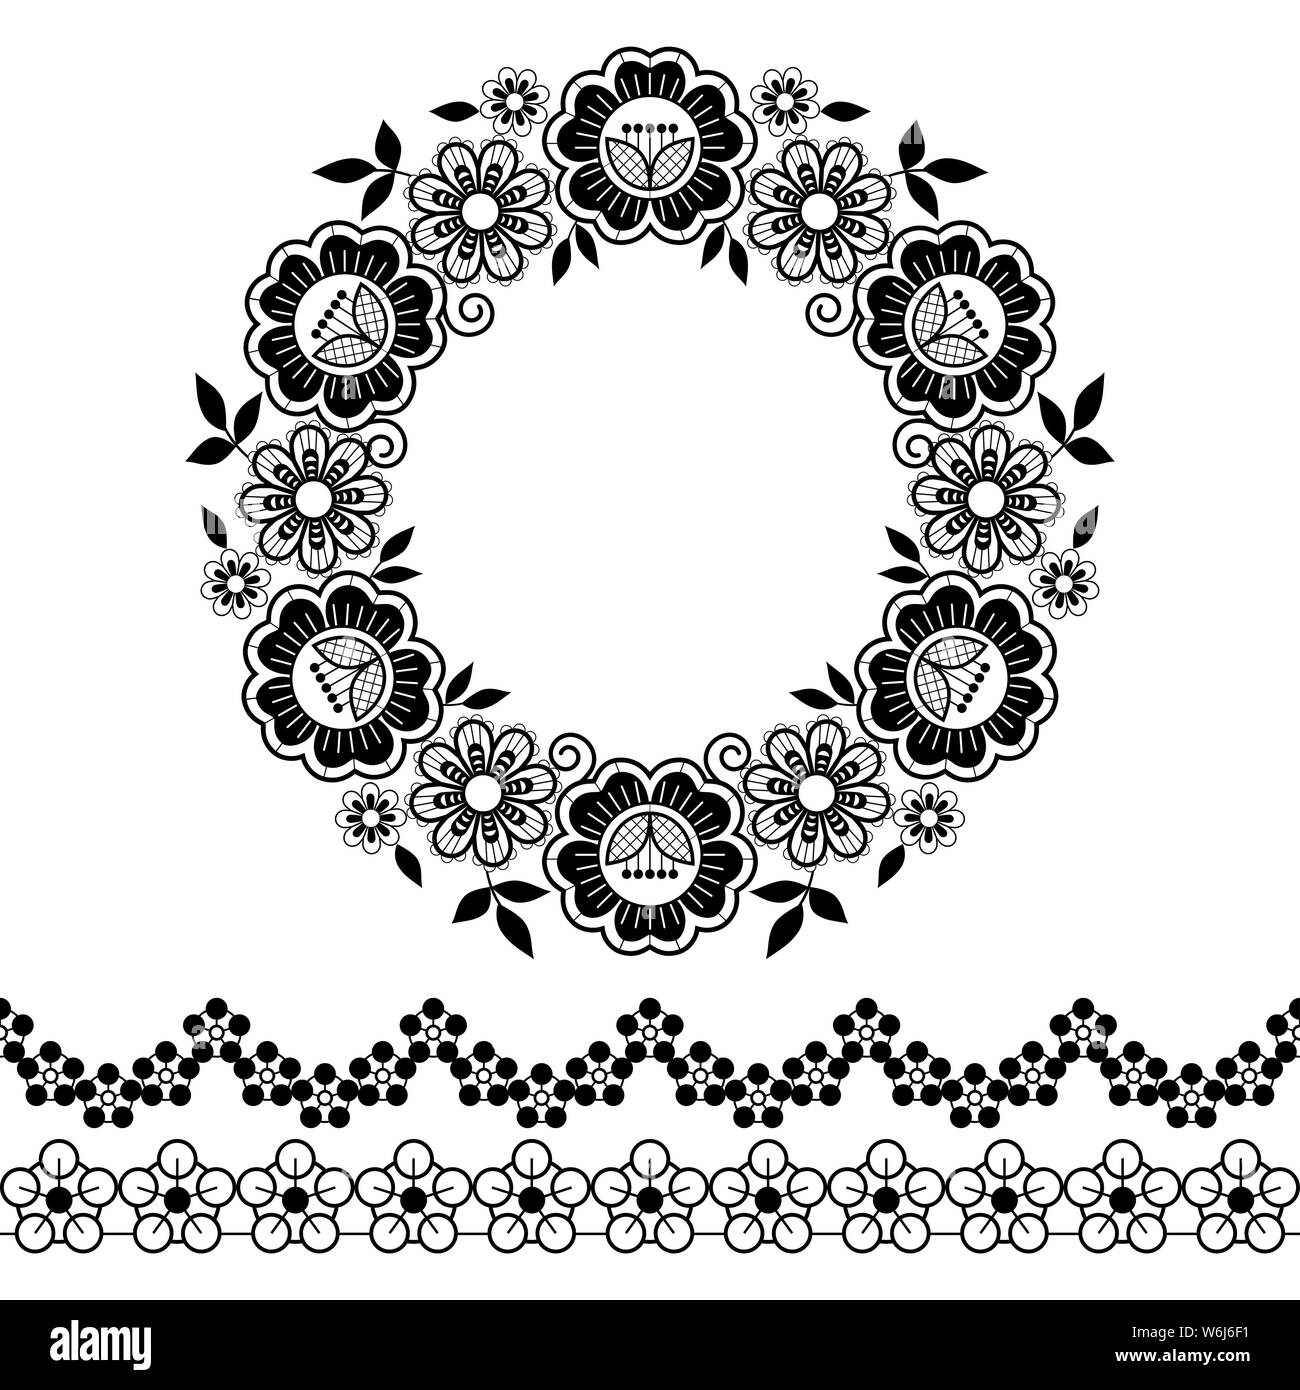 Mandala lace vector pattern, monochrome round design with flowers and swirls in black and white Stock Vector